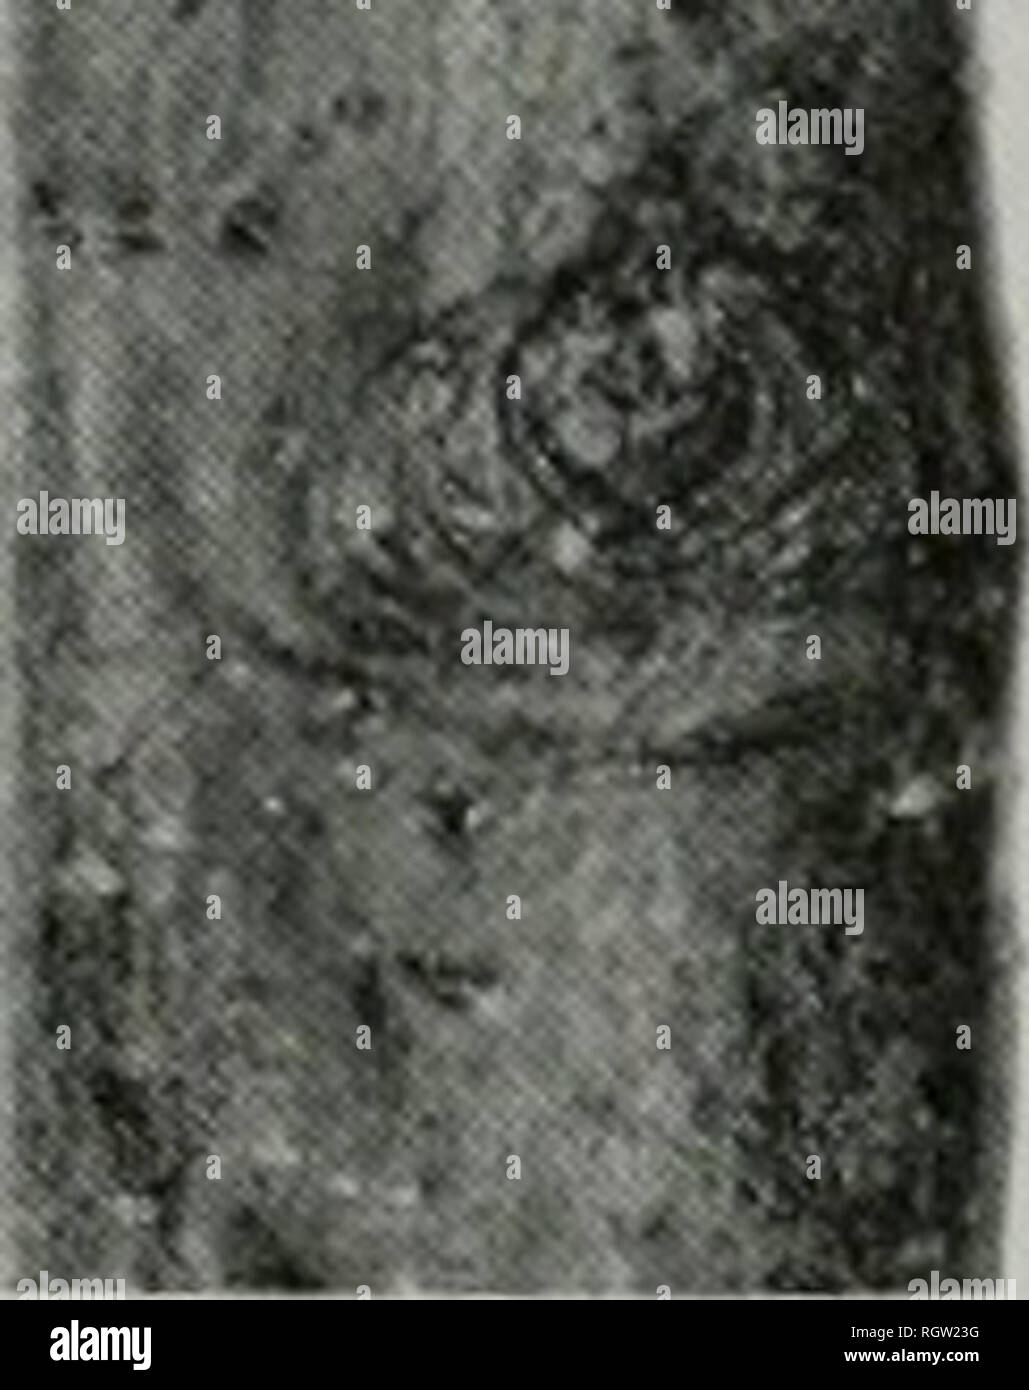 . Bulletin. Natural history; Natural history. Fig. 12.—Portion of a stroma o( Cylospora. The erumpent appearance of the stroma is shown in vertical section. The black stromatic tissue with its locules and spores is embedded in the cankerous host tissue. X 5.S. ^ d. Fig. 11.— Cytospora canker and dieback on black oak. Only a few scattered, erumptnt stromata are present in the light to dark brown, sunken, diseased region. The border ot this region is made conspicuous by the contrast in color of the living and diseased bark and by the shrunken appearance of the diseased bark. X 1.. Please note t Stock Photo